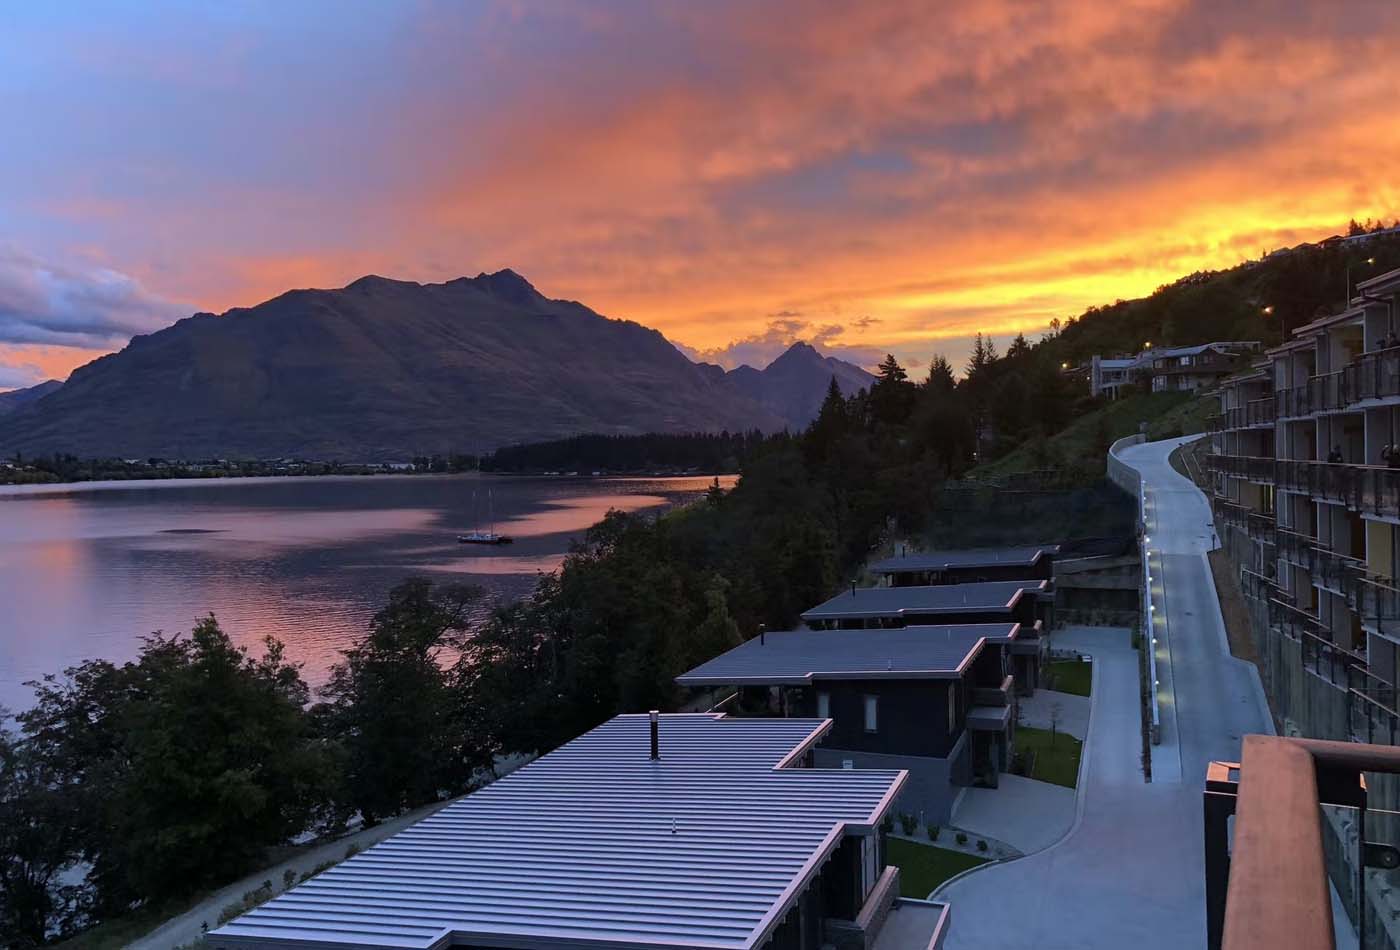 Sunset view over the Rees Hotel, New Zealand